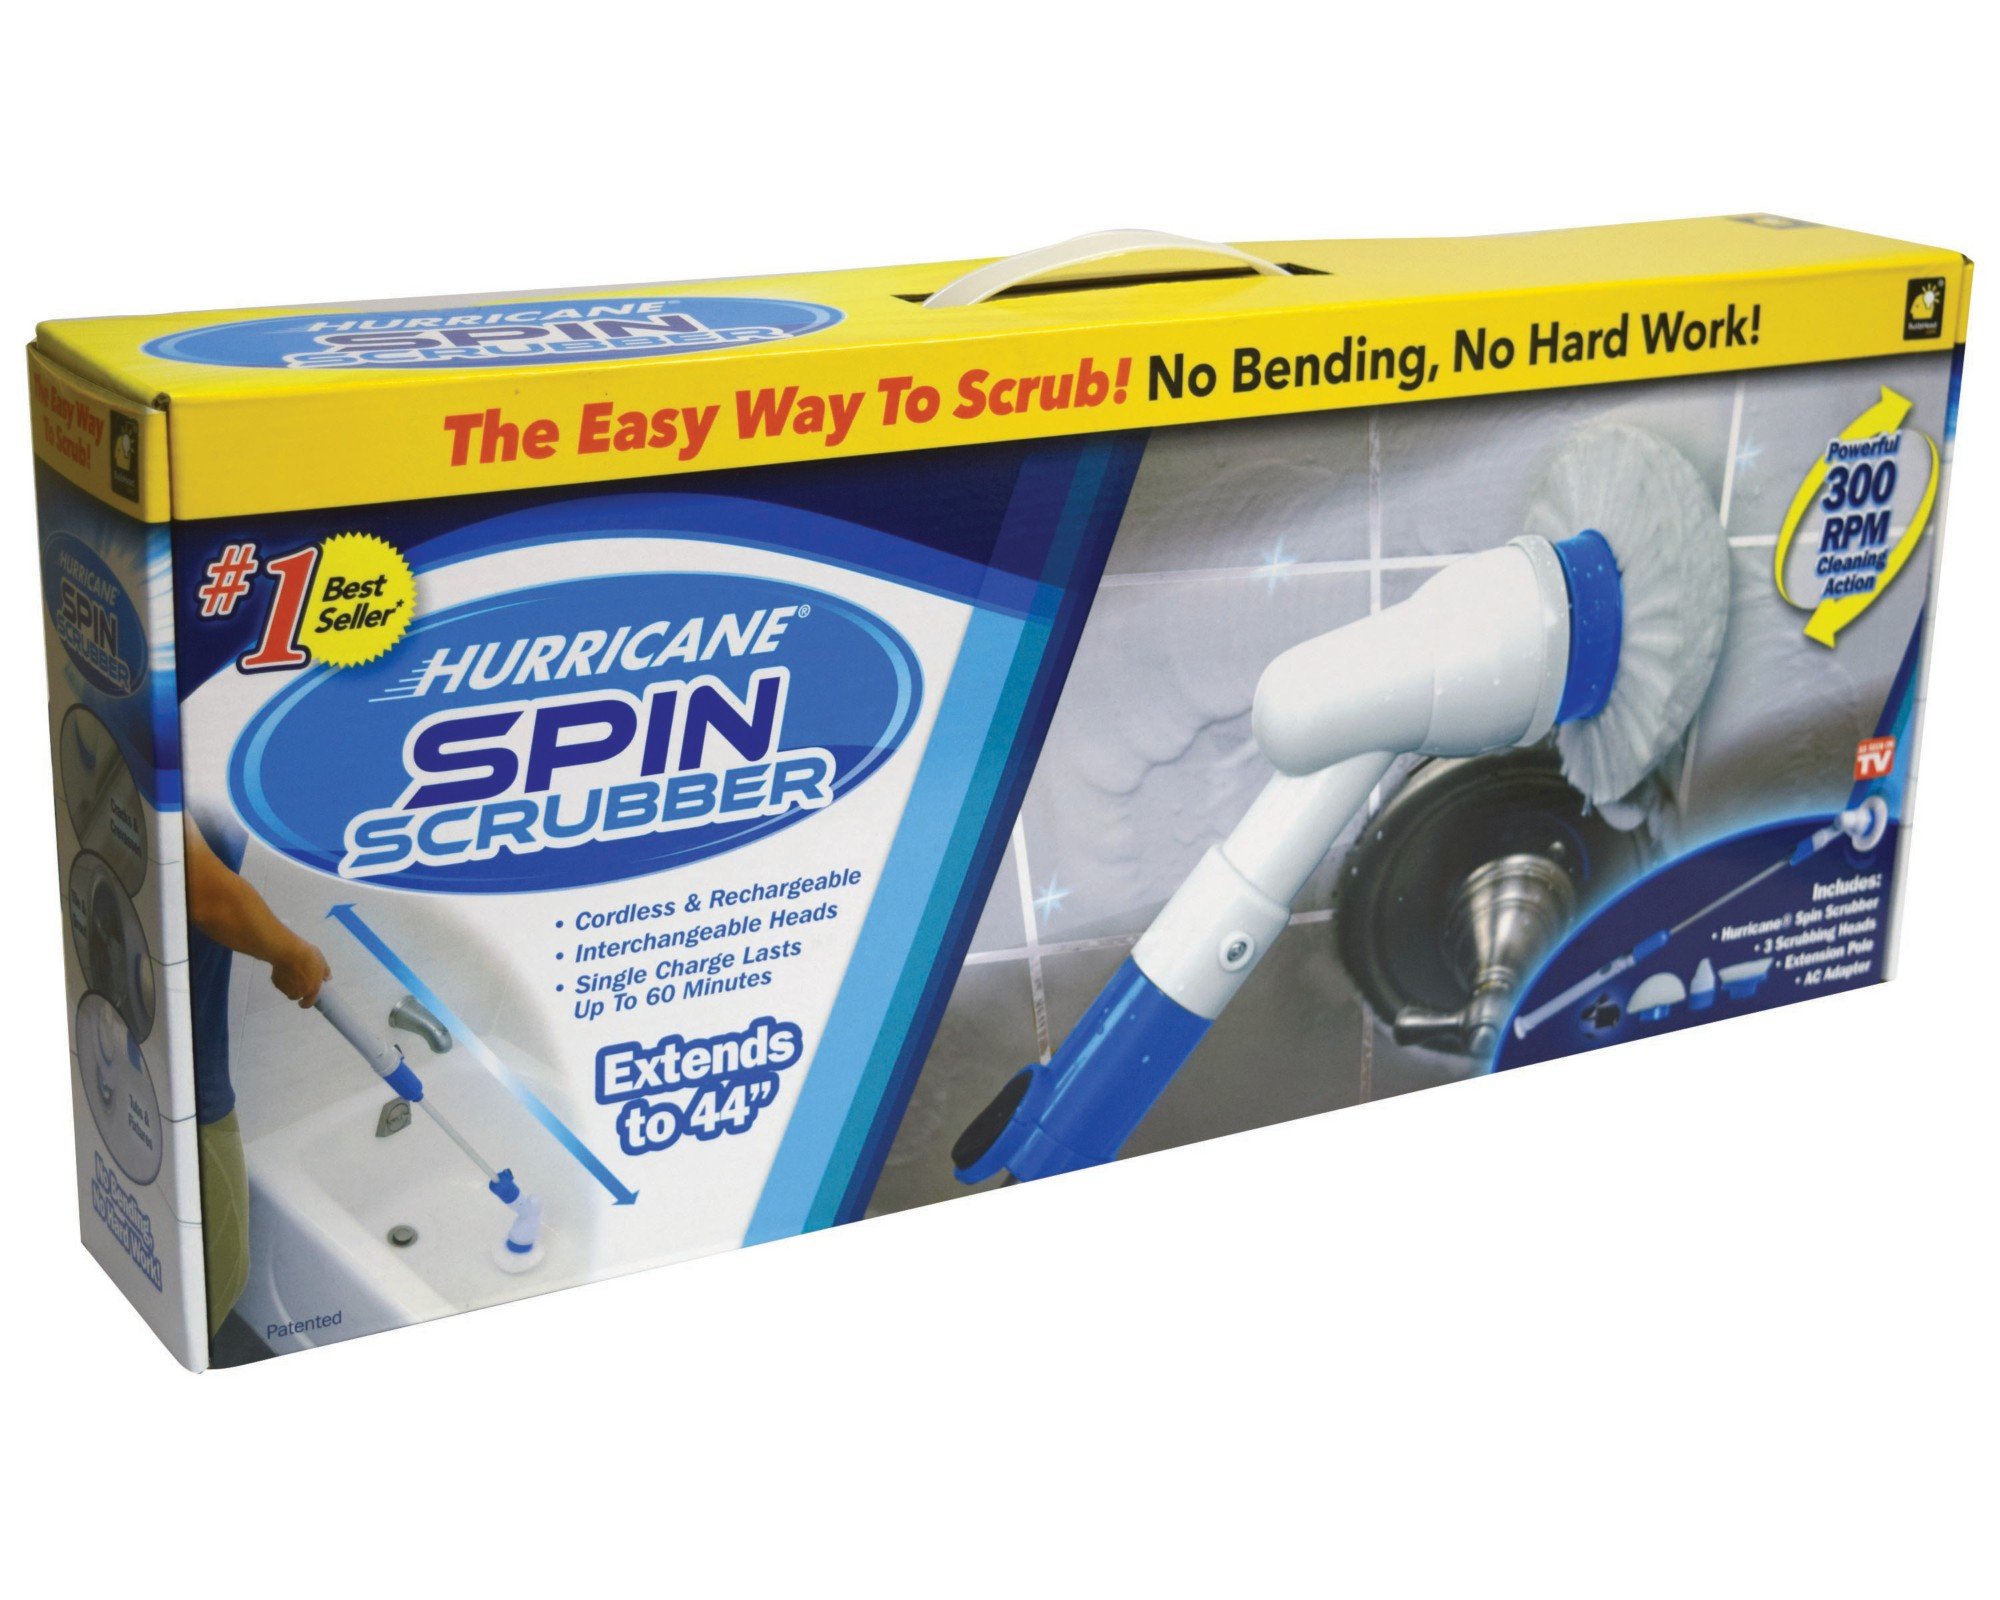 hurricane spin scrubber instruction manual